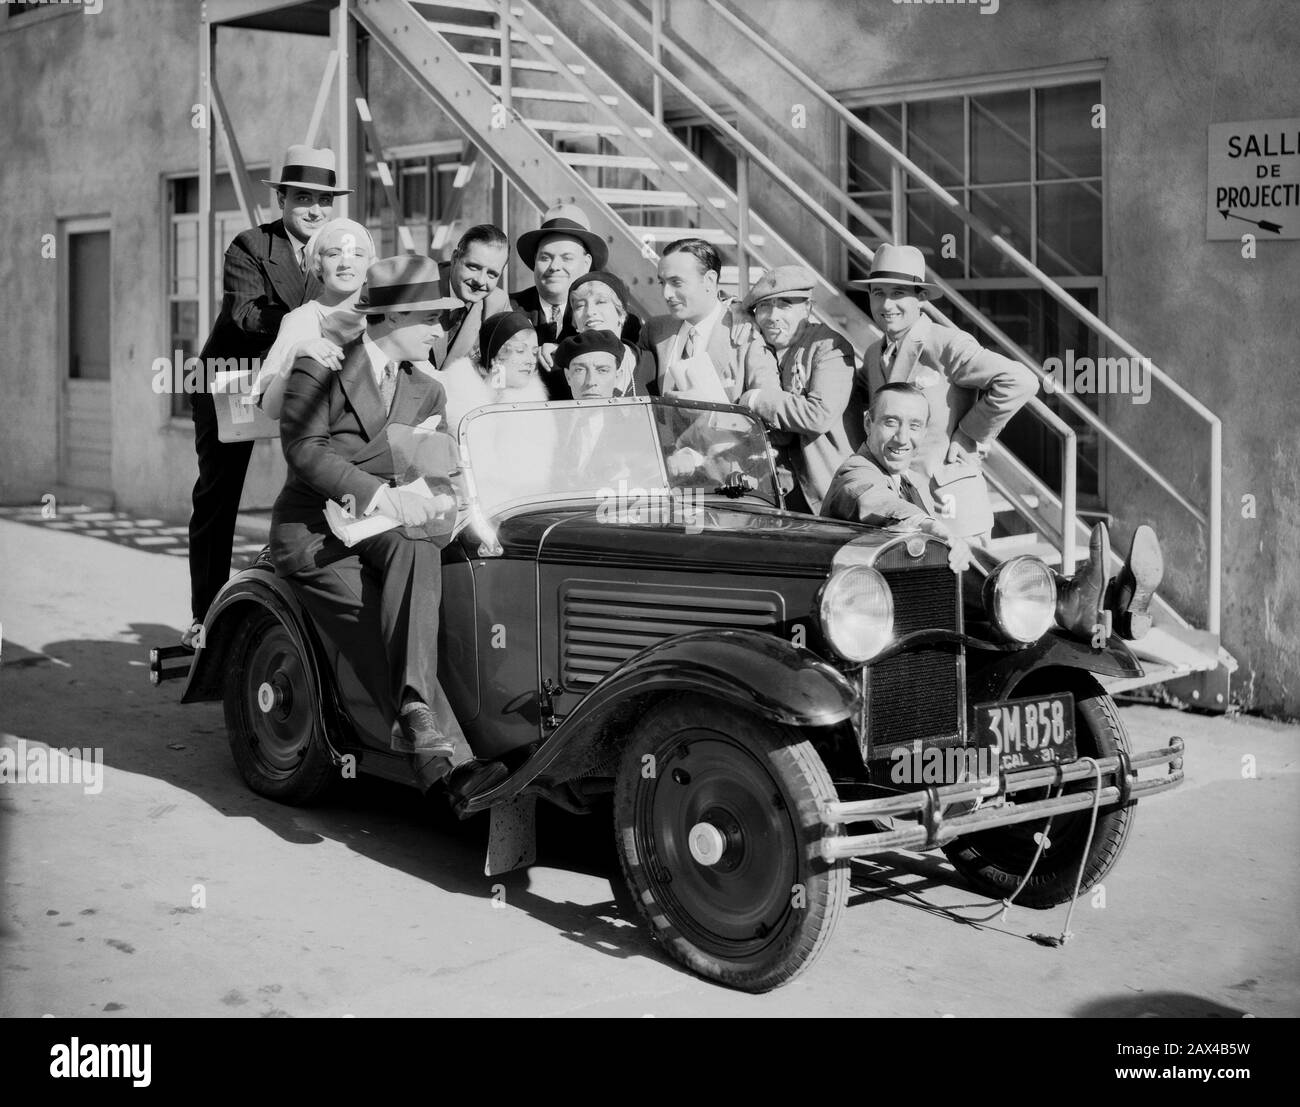 1931 , february , LOS ANGELES , USA  : The american silent movie actor and director BUSTER KEATON ( 1895 - 1966 ) in a pubblicity still with all the cast of the movie BUSTER SE MARIE , french version of his movie ' Parlor , Bedroom and Bath ' ( Io ... e le donne ) by Claude Autant-Lara and  Edward Brophy . The smiling man at the front of the car is comic actor George Davis.   Back ti him the movie director CLAUDE AUTANT-LARA with hat and hand at his side. Around Buster Keaton the actress of the movie: Françoise Rosay , Jeanne Helbling and Lya Lys ( 1908 – 1986 ). - SILENT MOVIE - CINEMA MUTO Stock Photo